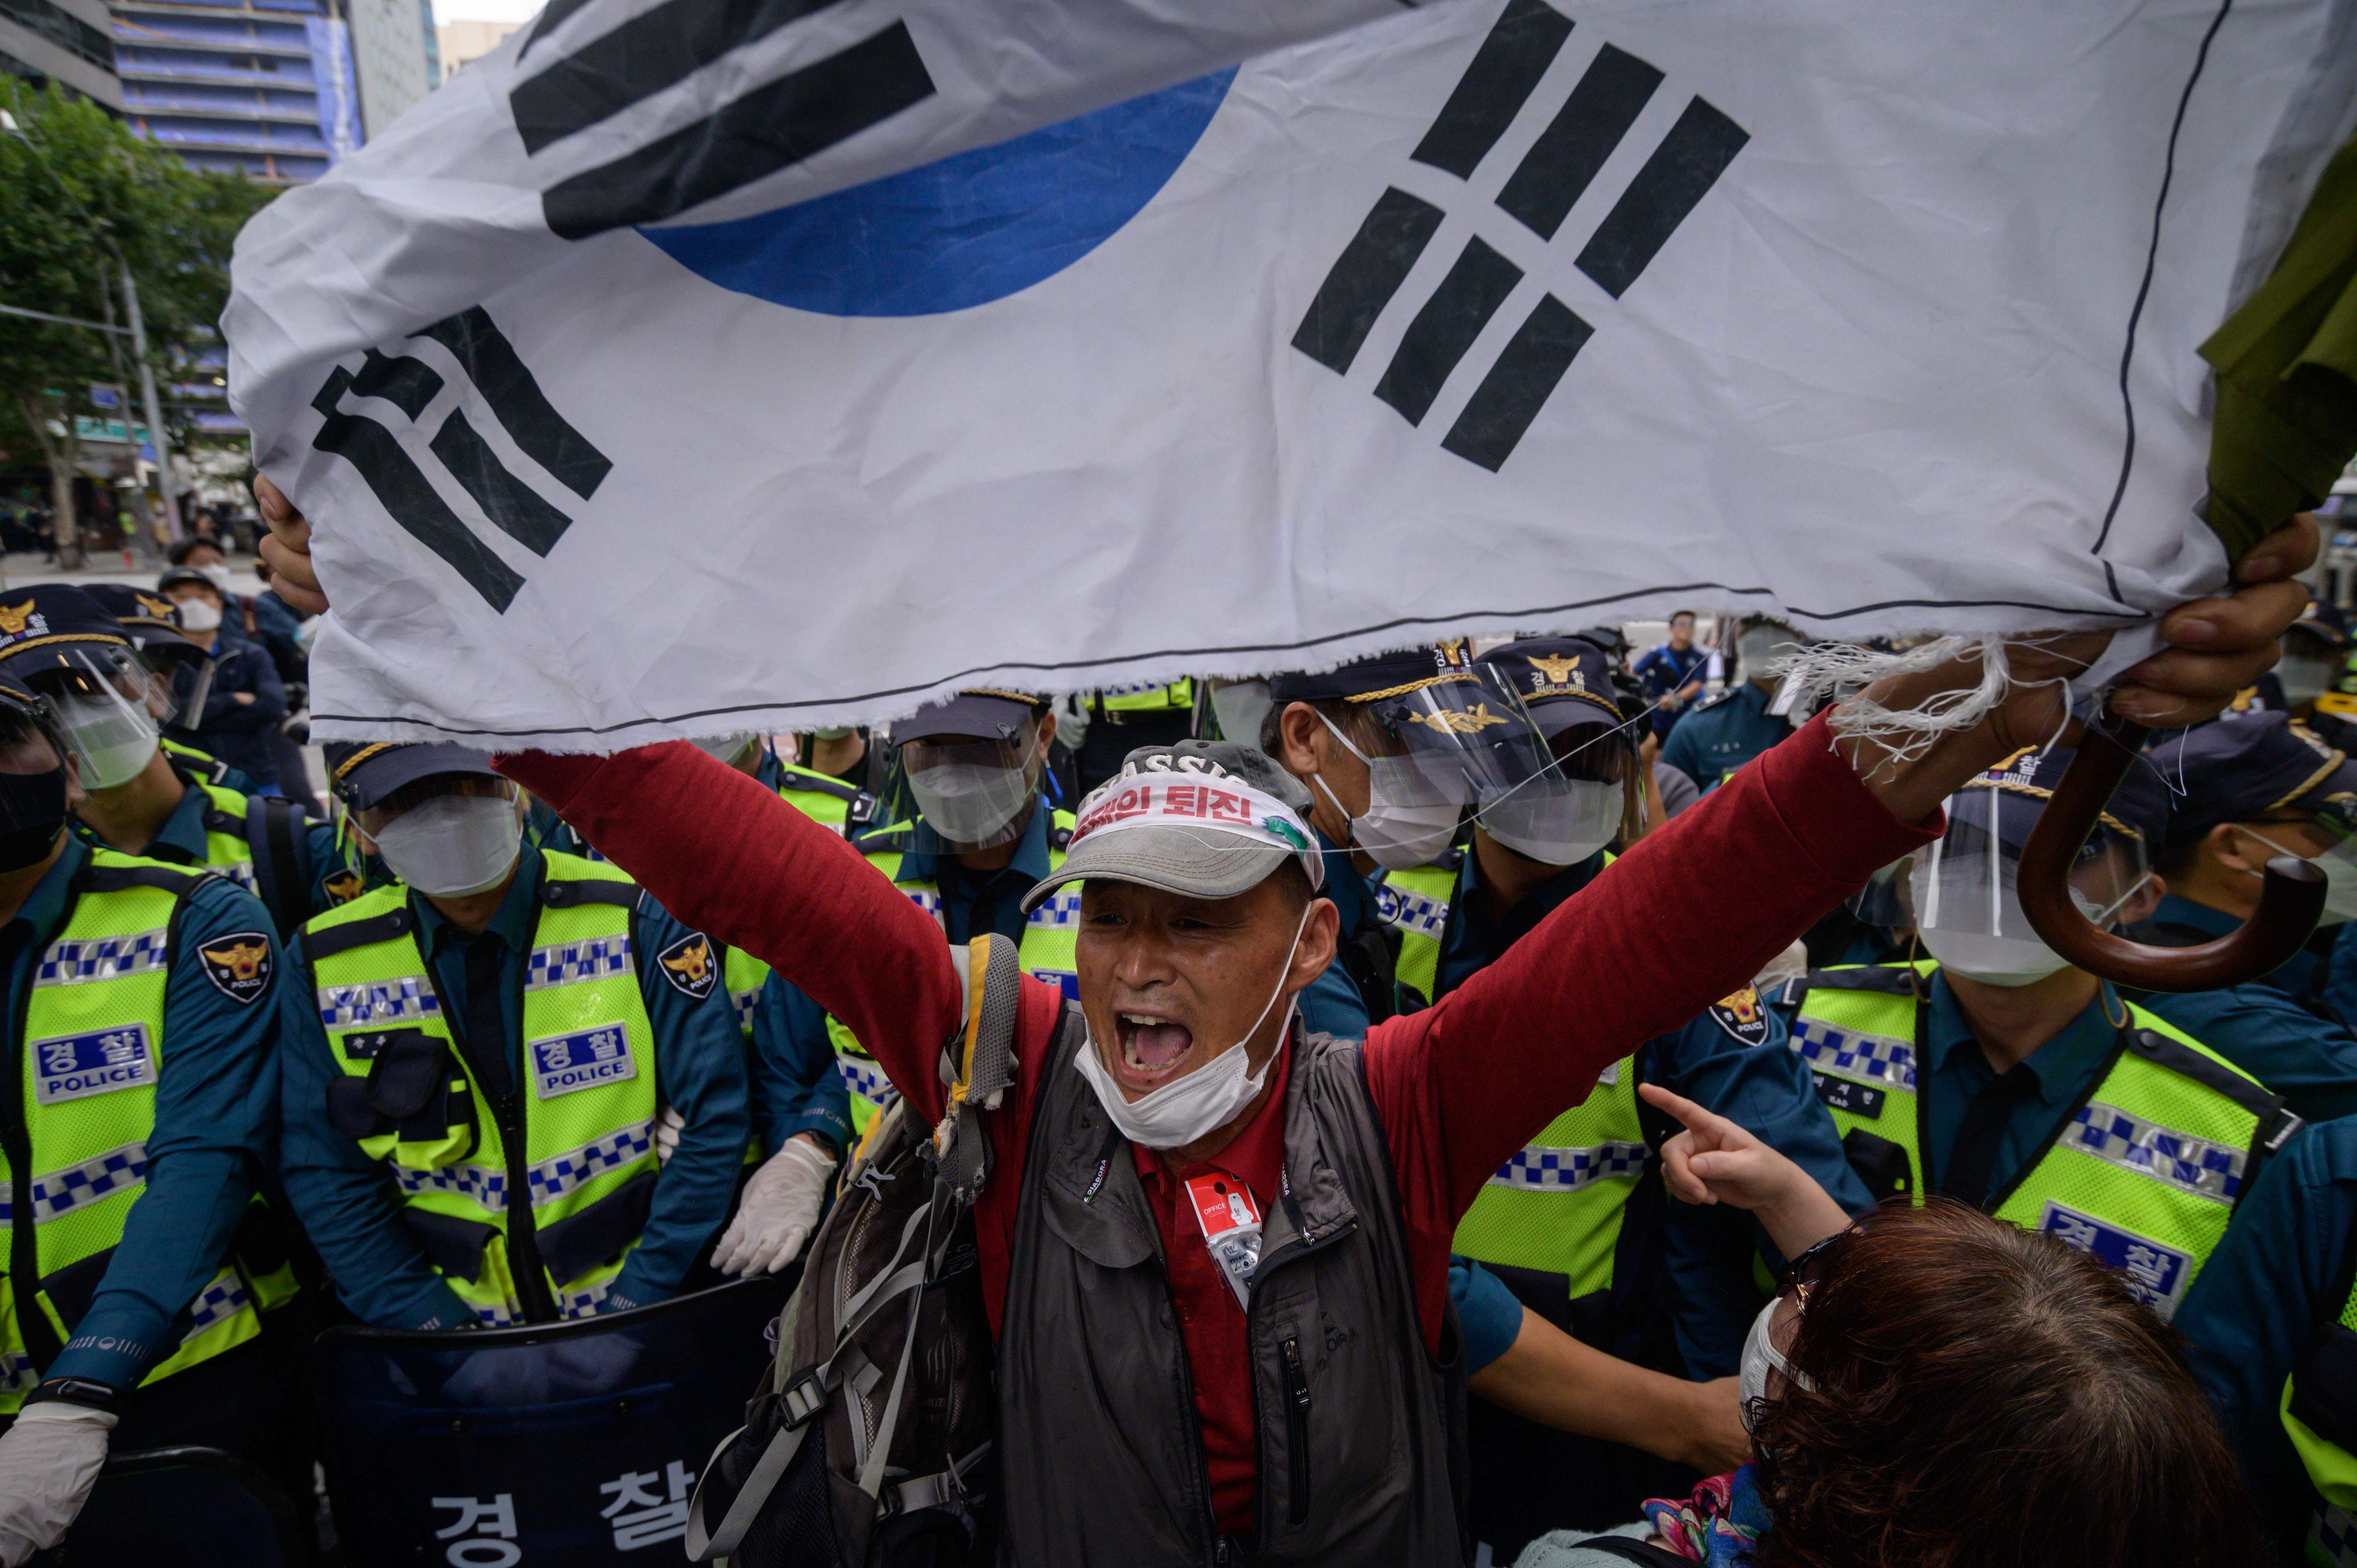 A conservative anti-government protester shouts slogans during an attempted rally in the central Gwanghwamun district of Seoul as South Korea marks 'Foundation Day' on October 3, 2020. - Conservative groups had planned to hold anti-govenment rallies throughout central Seoul, which were banned by police due to concerns over the spread of the covid-19 coronavirus. Credit: AFP